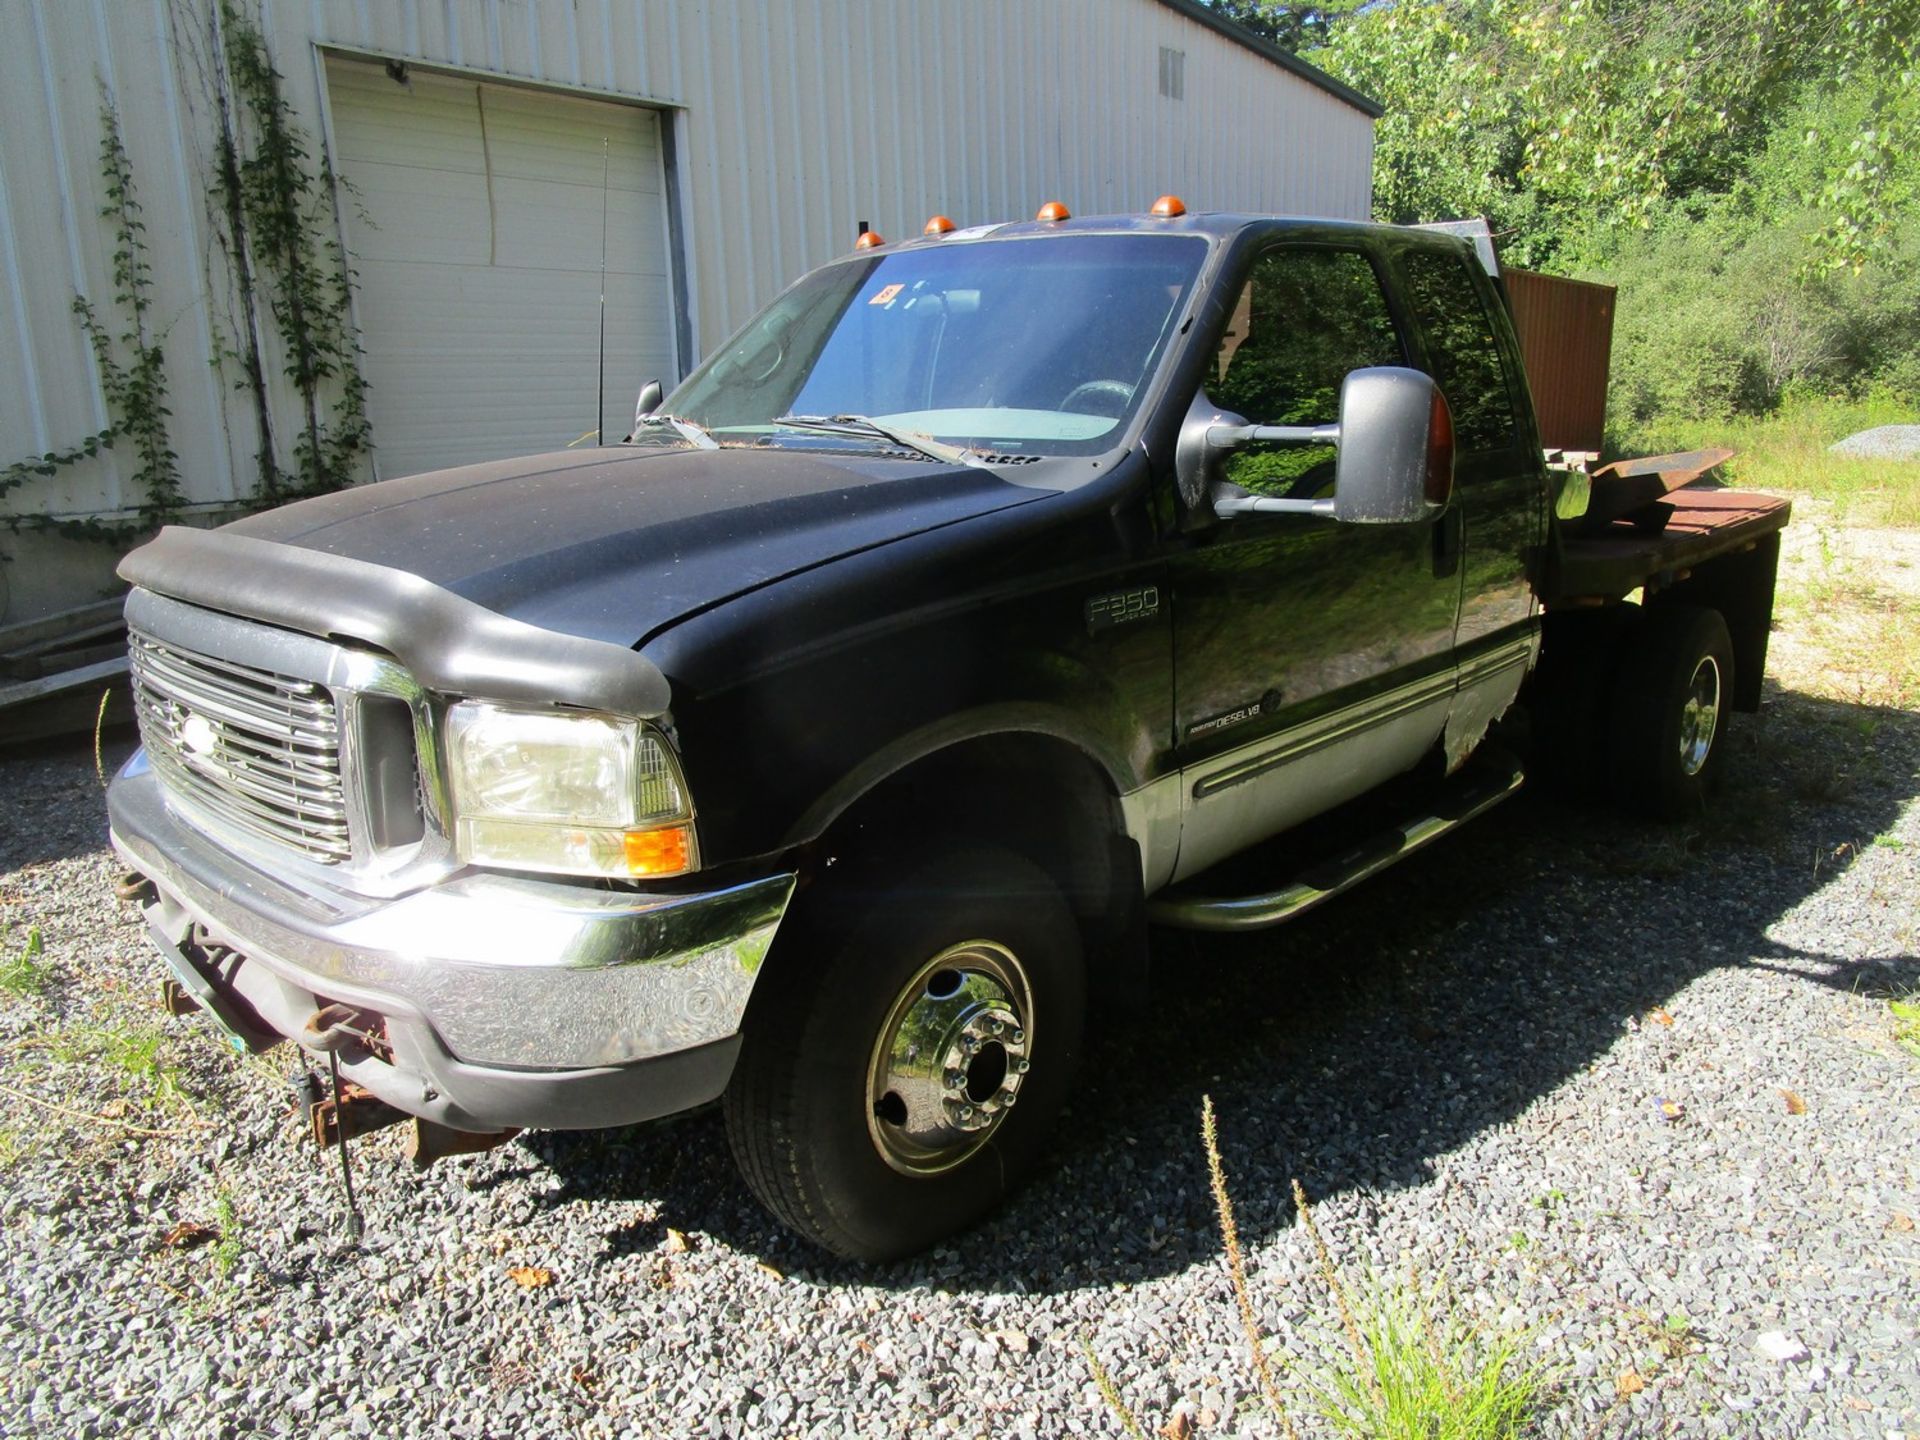 1999 Ford F350 Super Duty Flatbed Truck, Dually Converted, 7.3 Power Stroke Diesel, Automatic, Wired